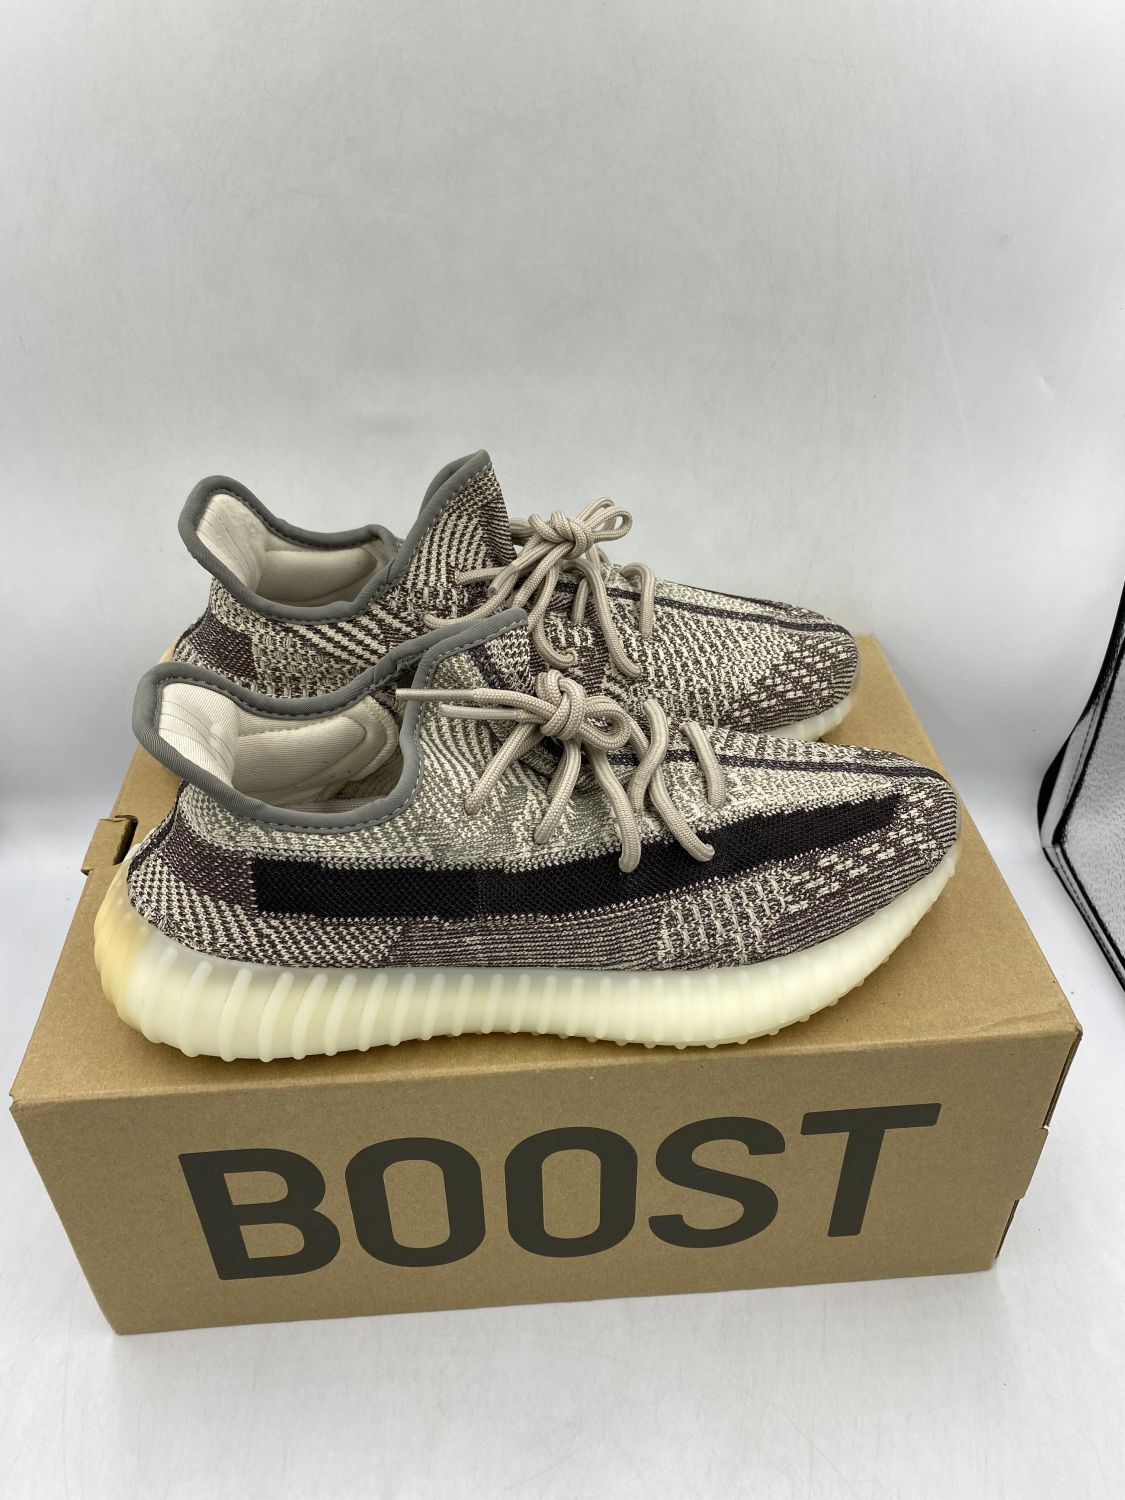 Adidas Yeezy Boost 350 V2 Zyon | AfterMarket